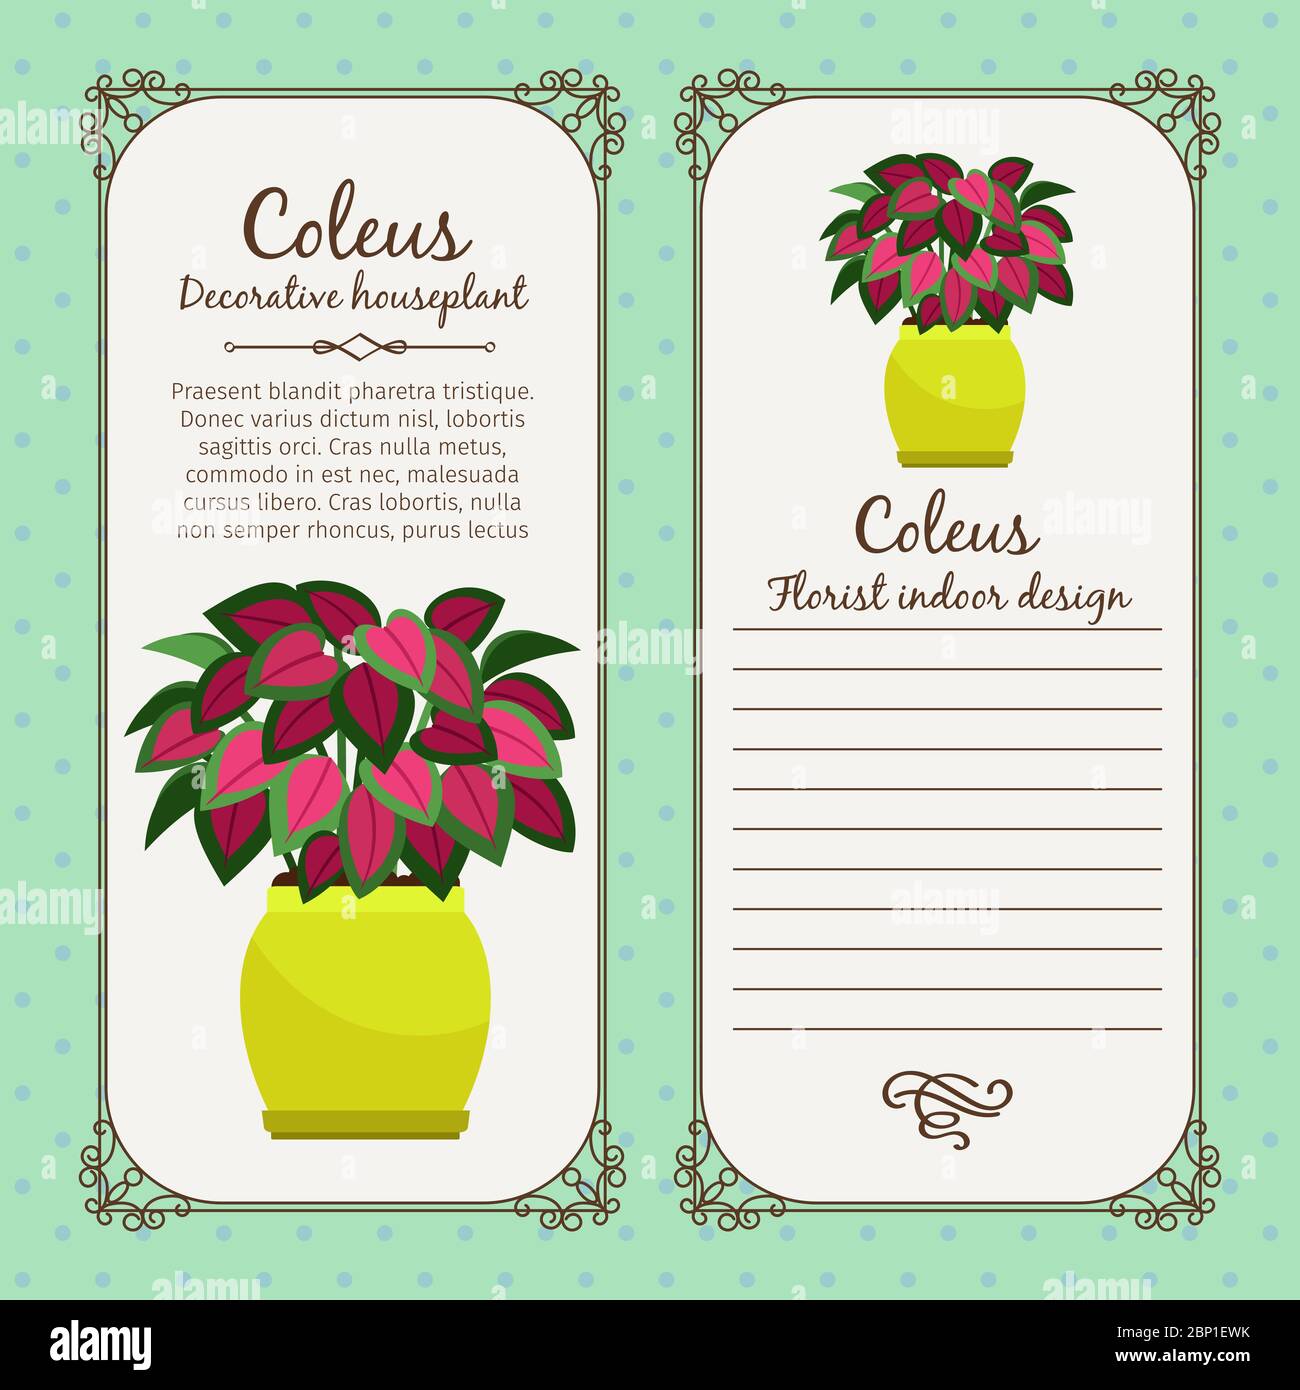 Vintage label template with decorative coleus plant in pot, vector illustration Stock Vector